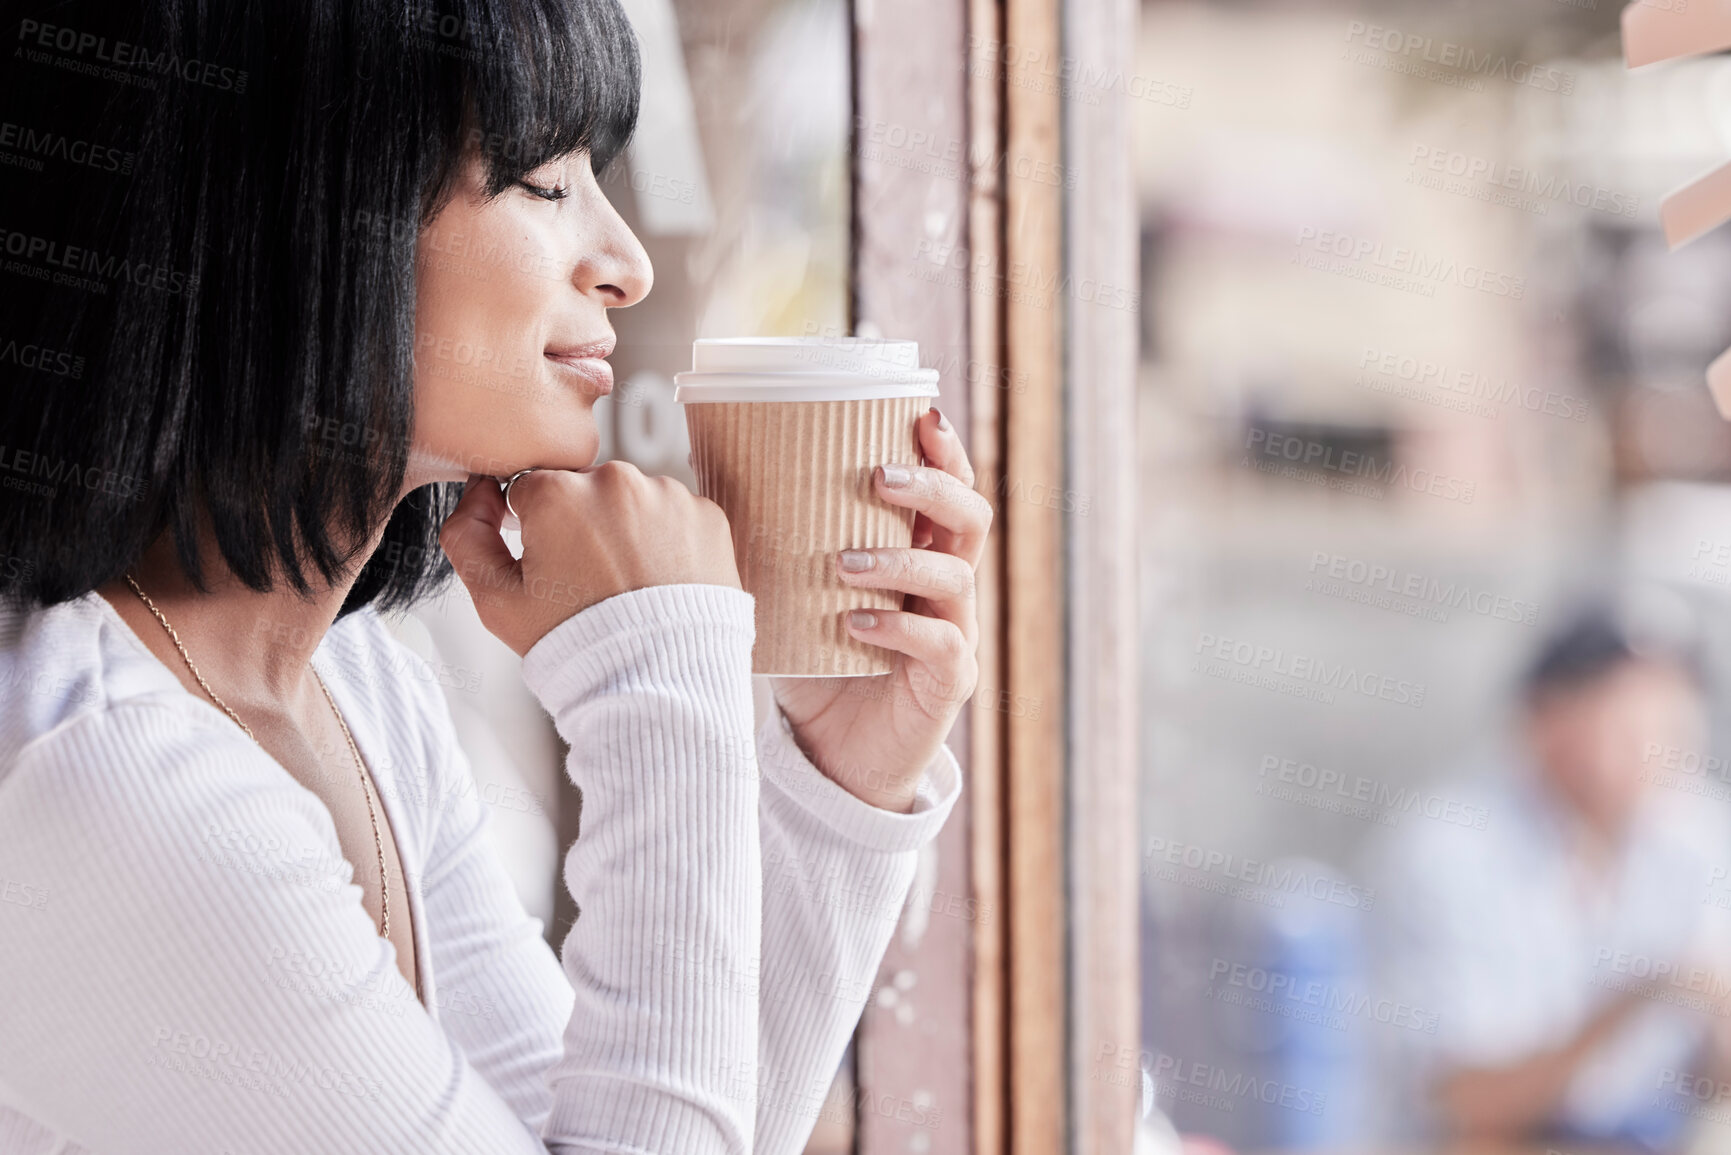 Buy stock photo Relax, coffee shop and black woman smell coffee in morning for satisfaction, calm and peace on break. Wellness, lifestyle and happy woman enjoy aroma or scent of tea, latte or beverage by cafe window